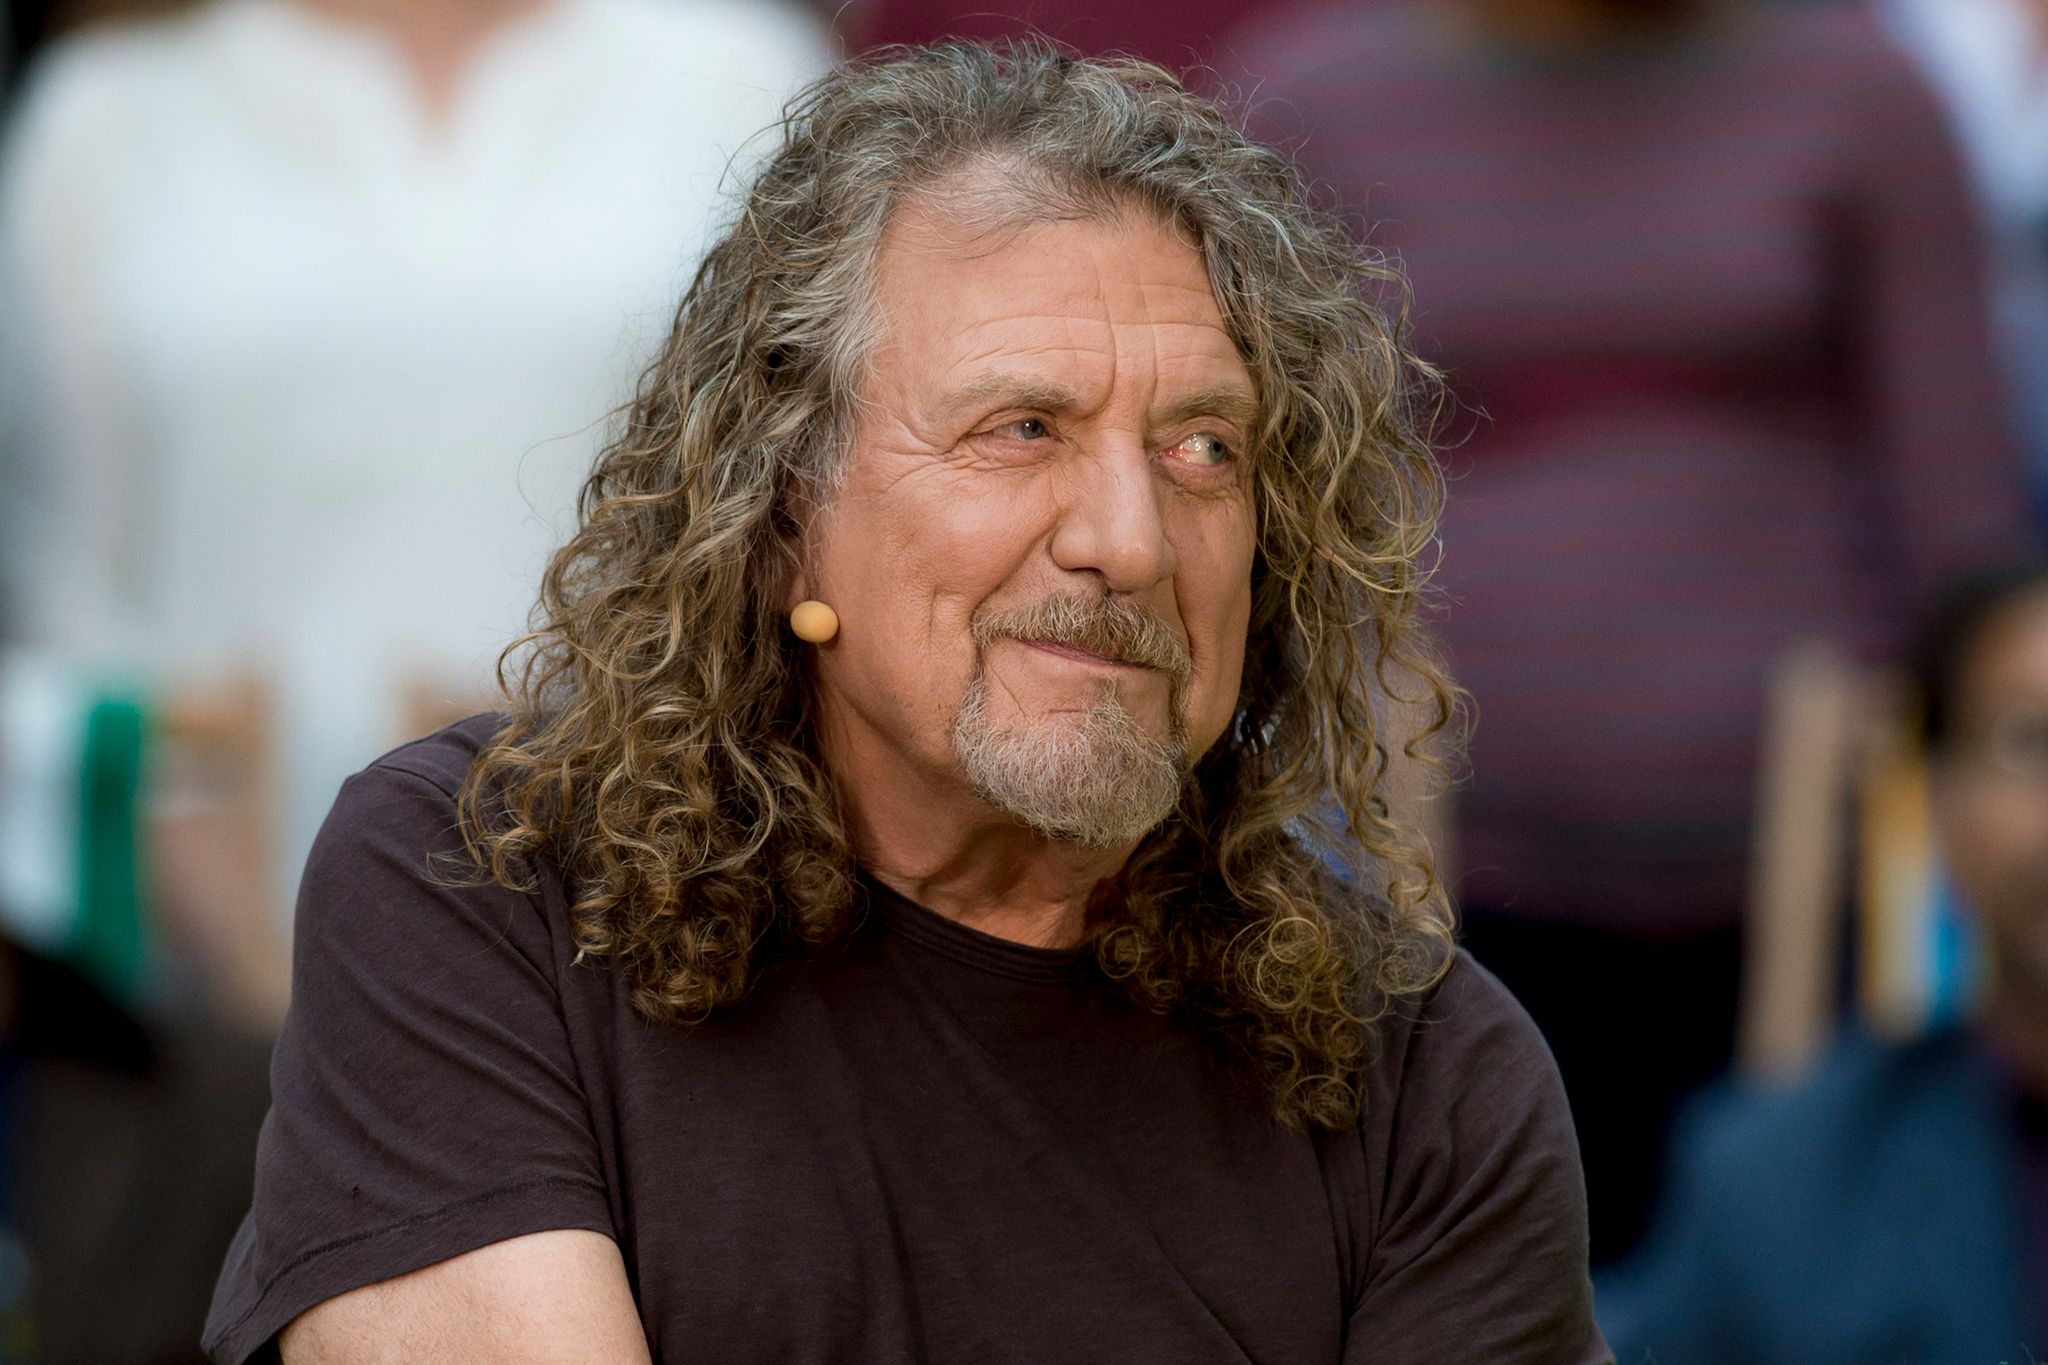 Robert Plant "One Show" at BBC Broadcasting House on September 5, 2014, in London, United Kingdom. | Source: Getty Images